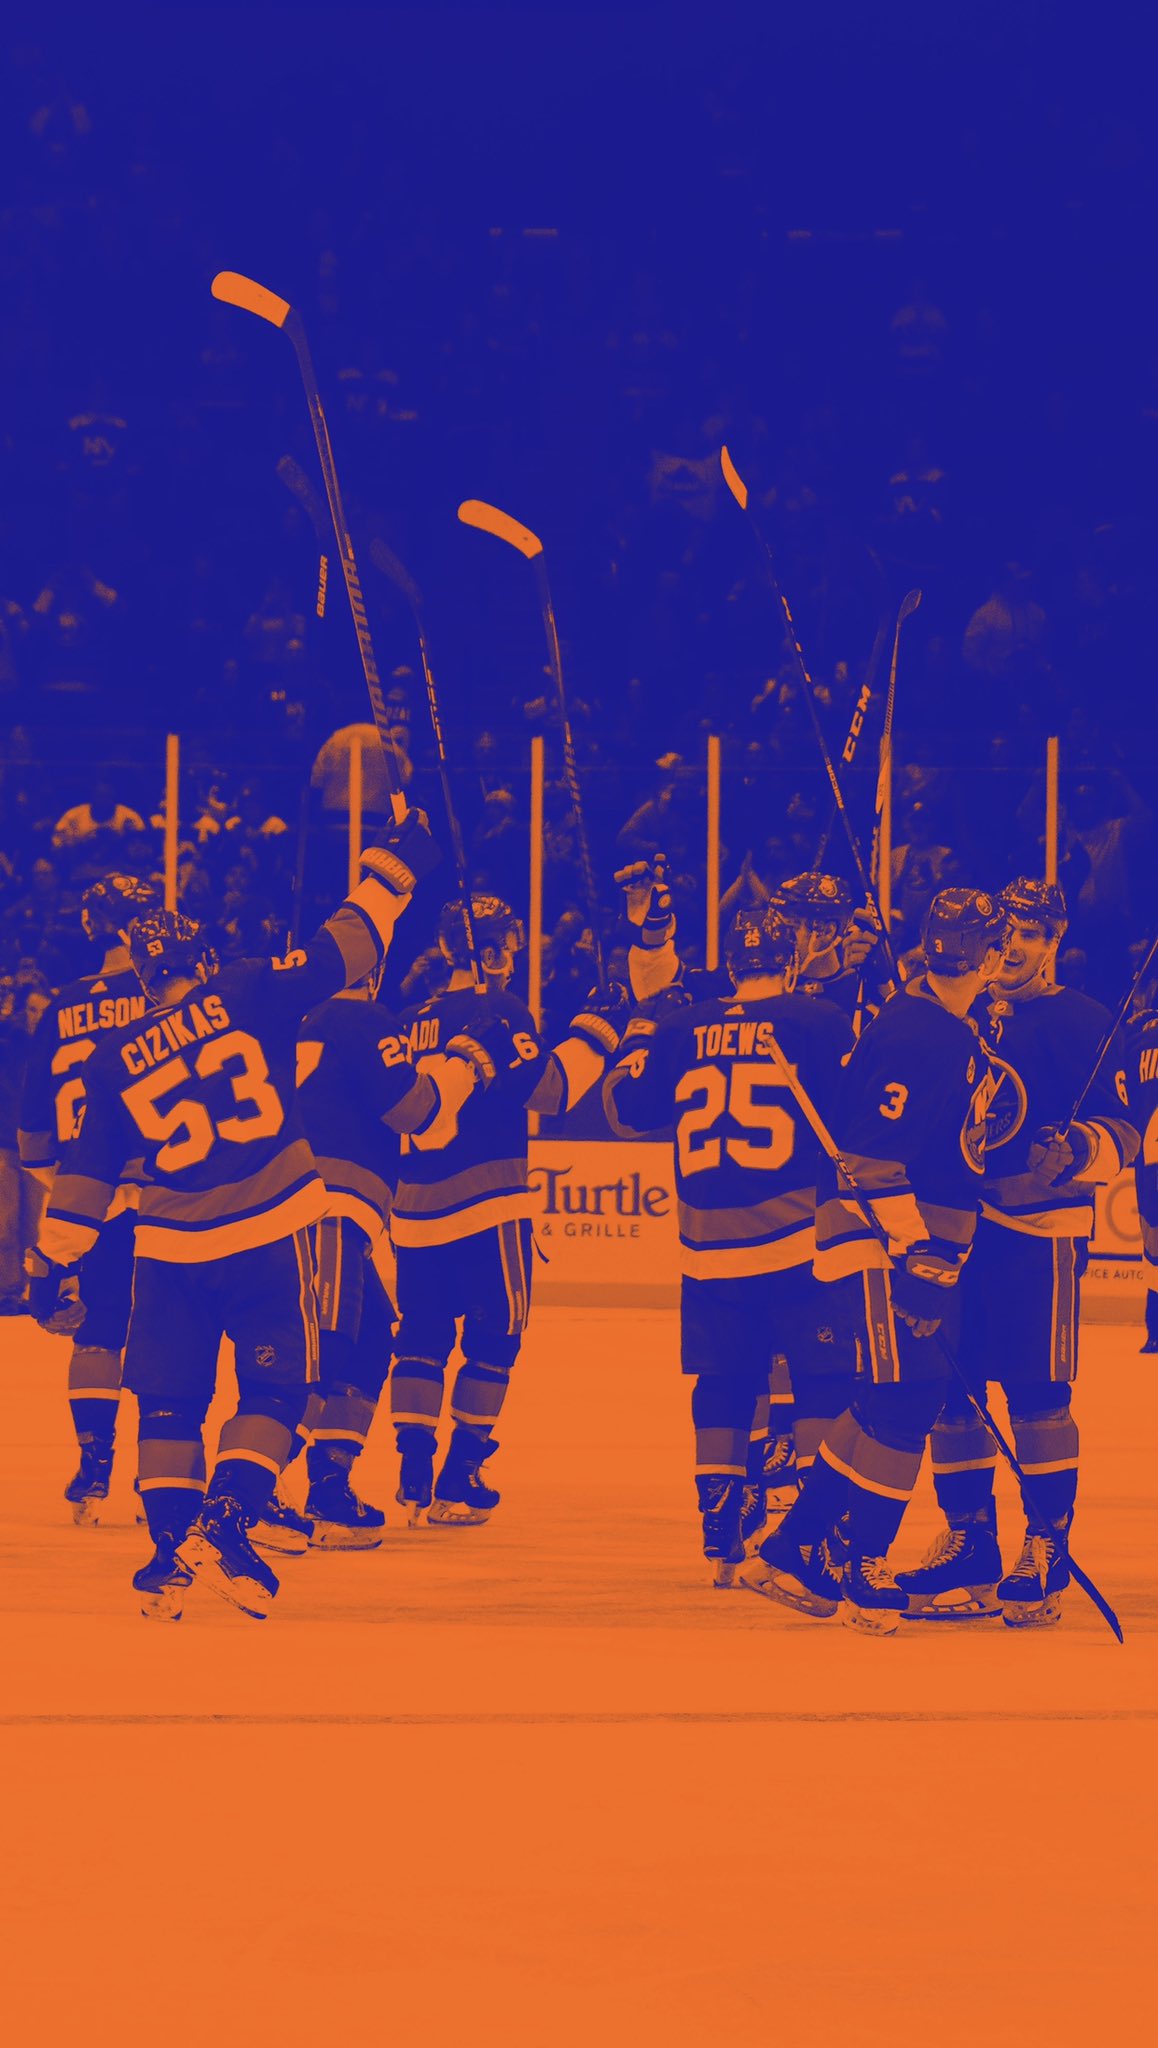 New York Islanders on X: This week's #WallpaperWednesday supports